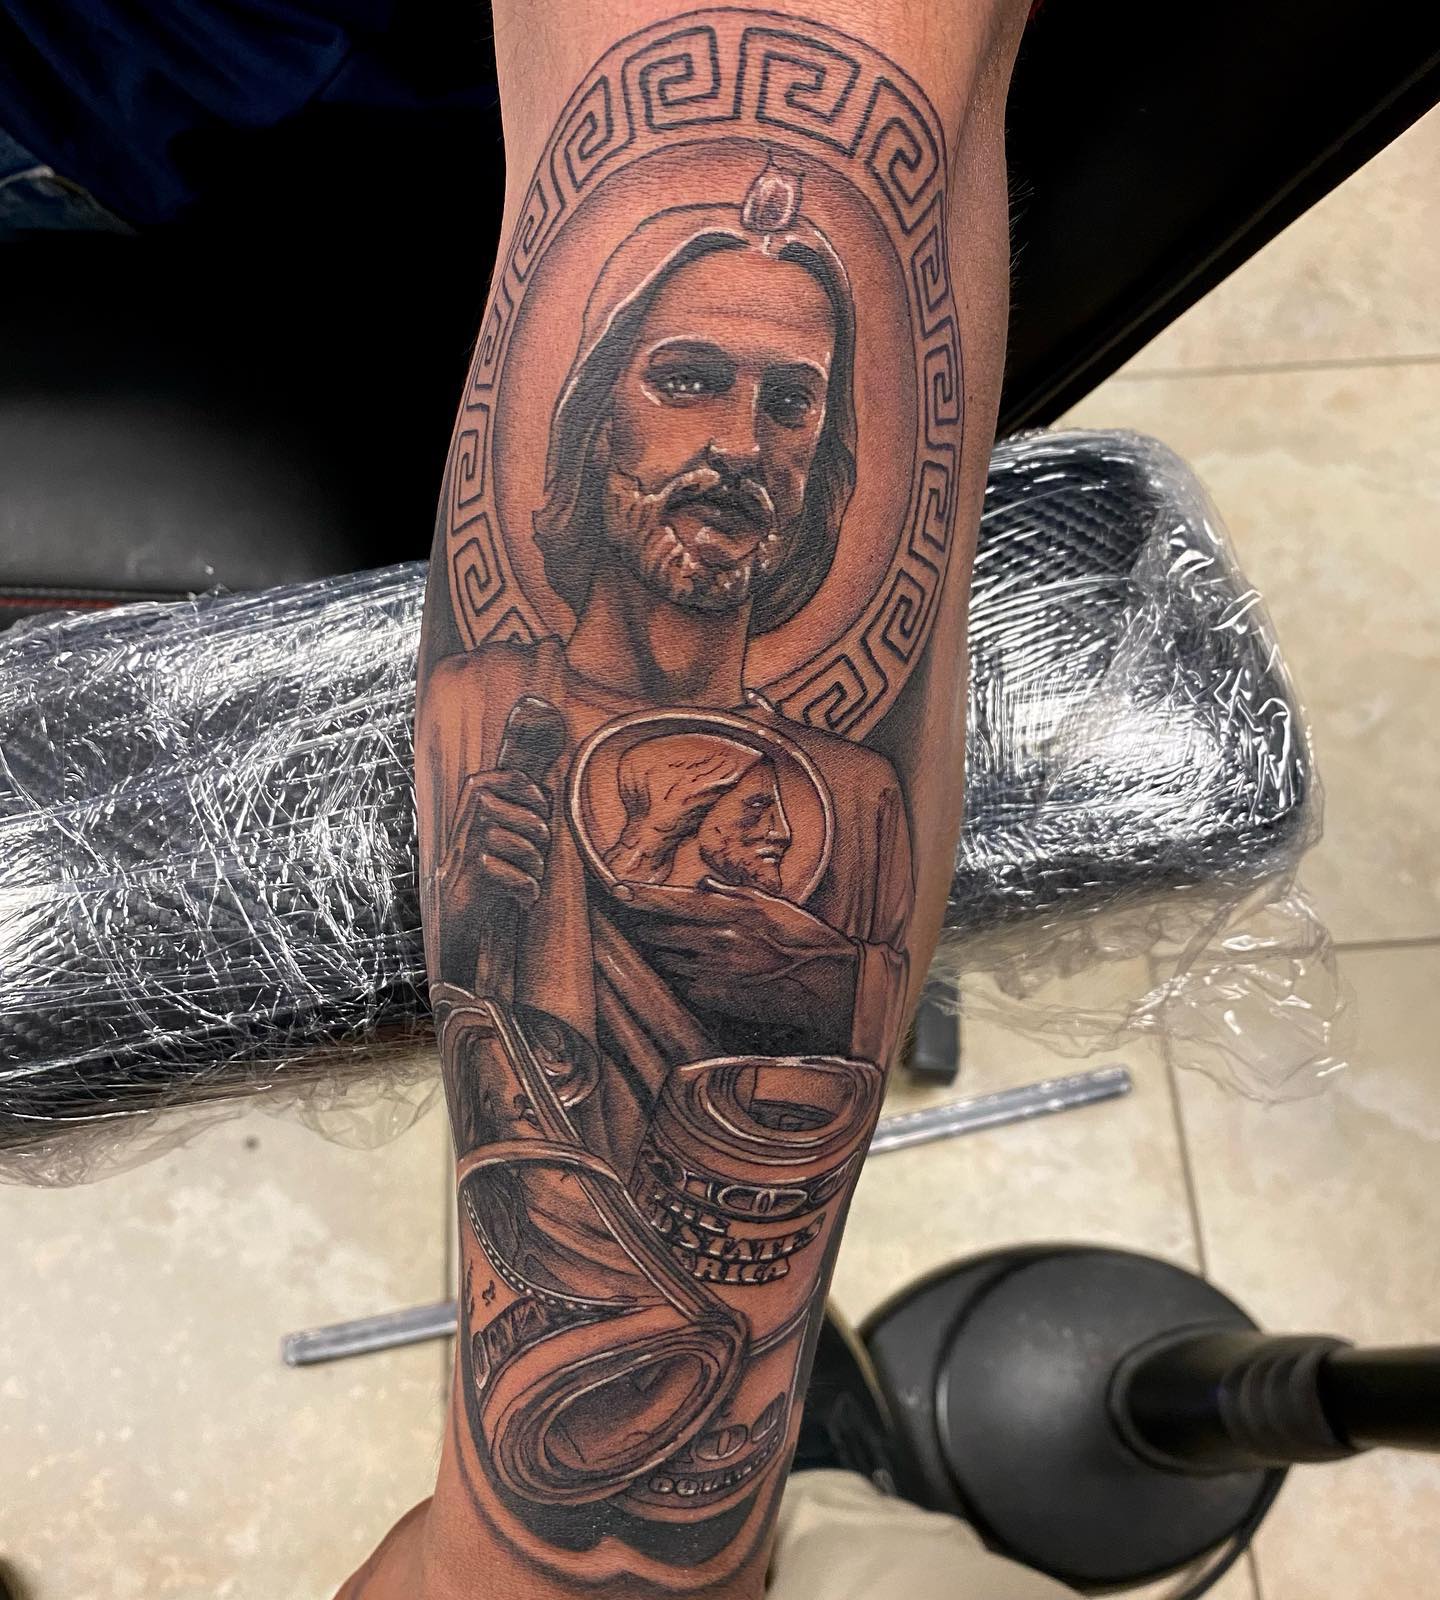 San Judas to finish off his sleeve  Text 6262576943 for appointments  sanjudas sanjudastattoo tattoo tattoos westcovina covina   Instagram